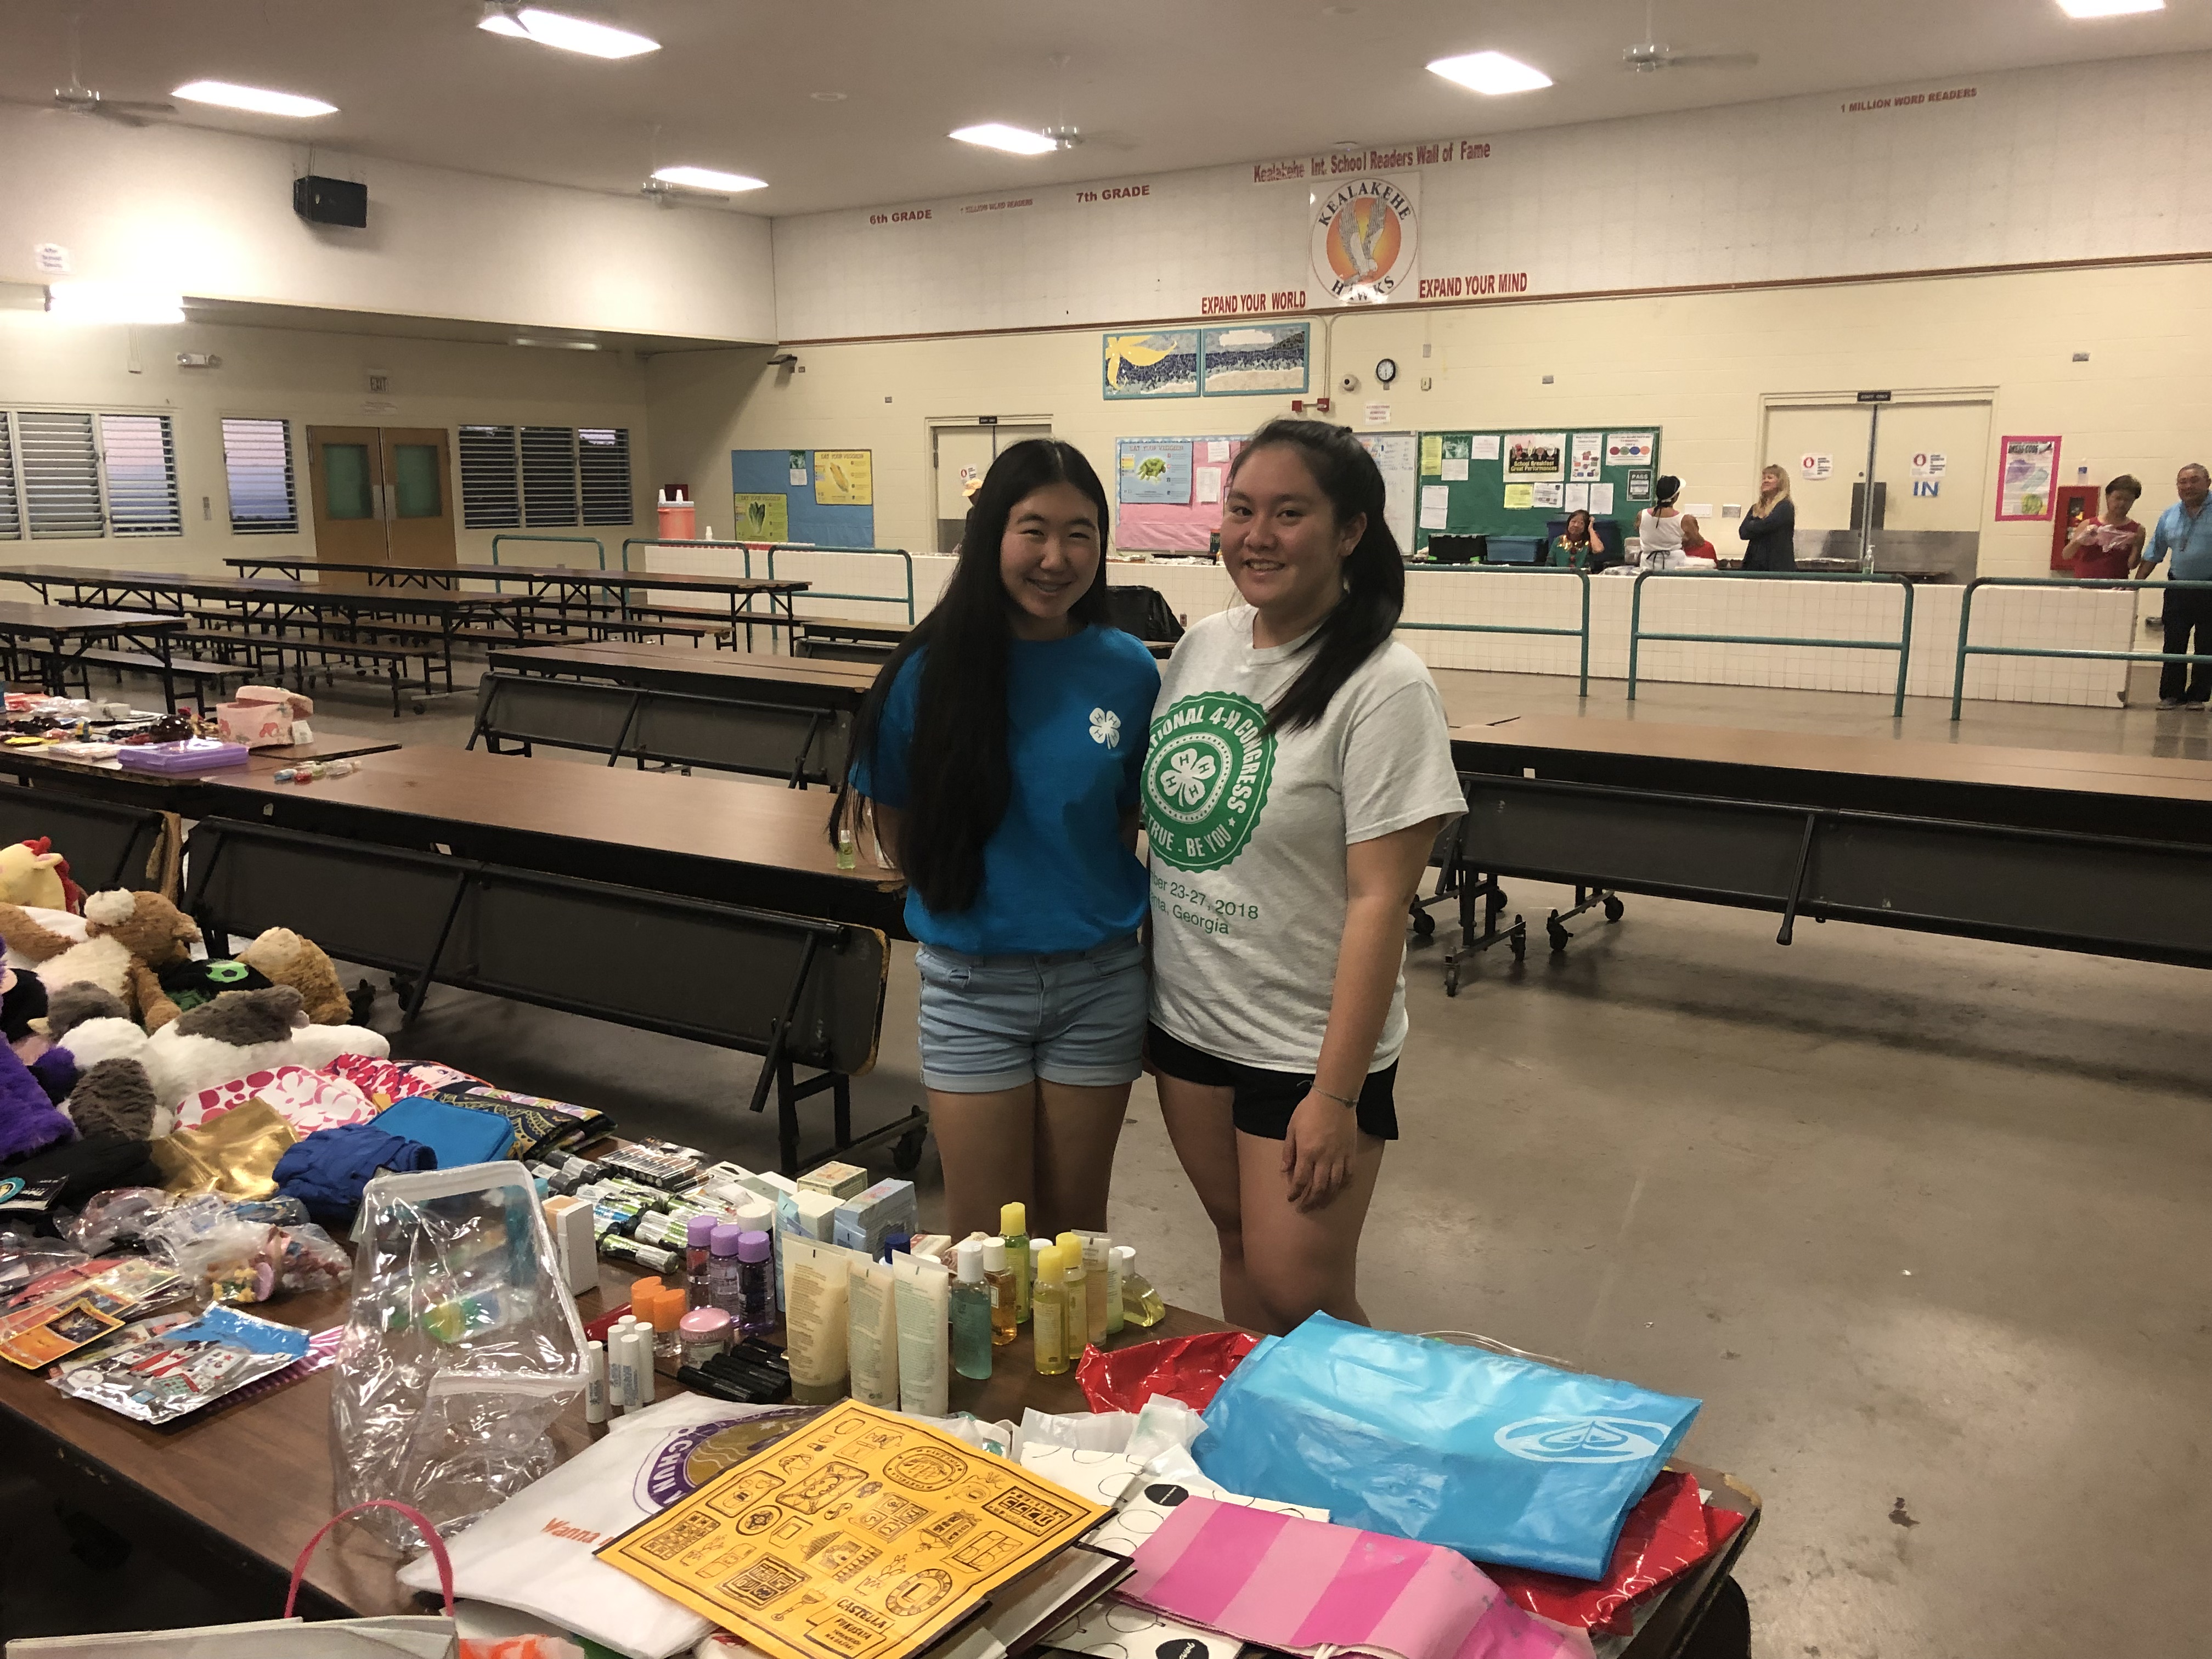 Shayla S. and 4-H members oranized community donation drive